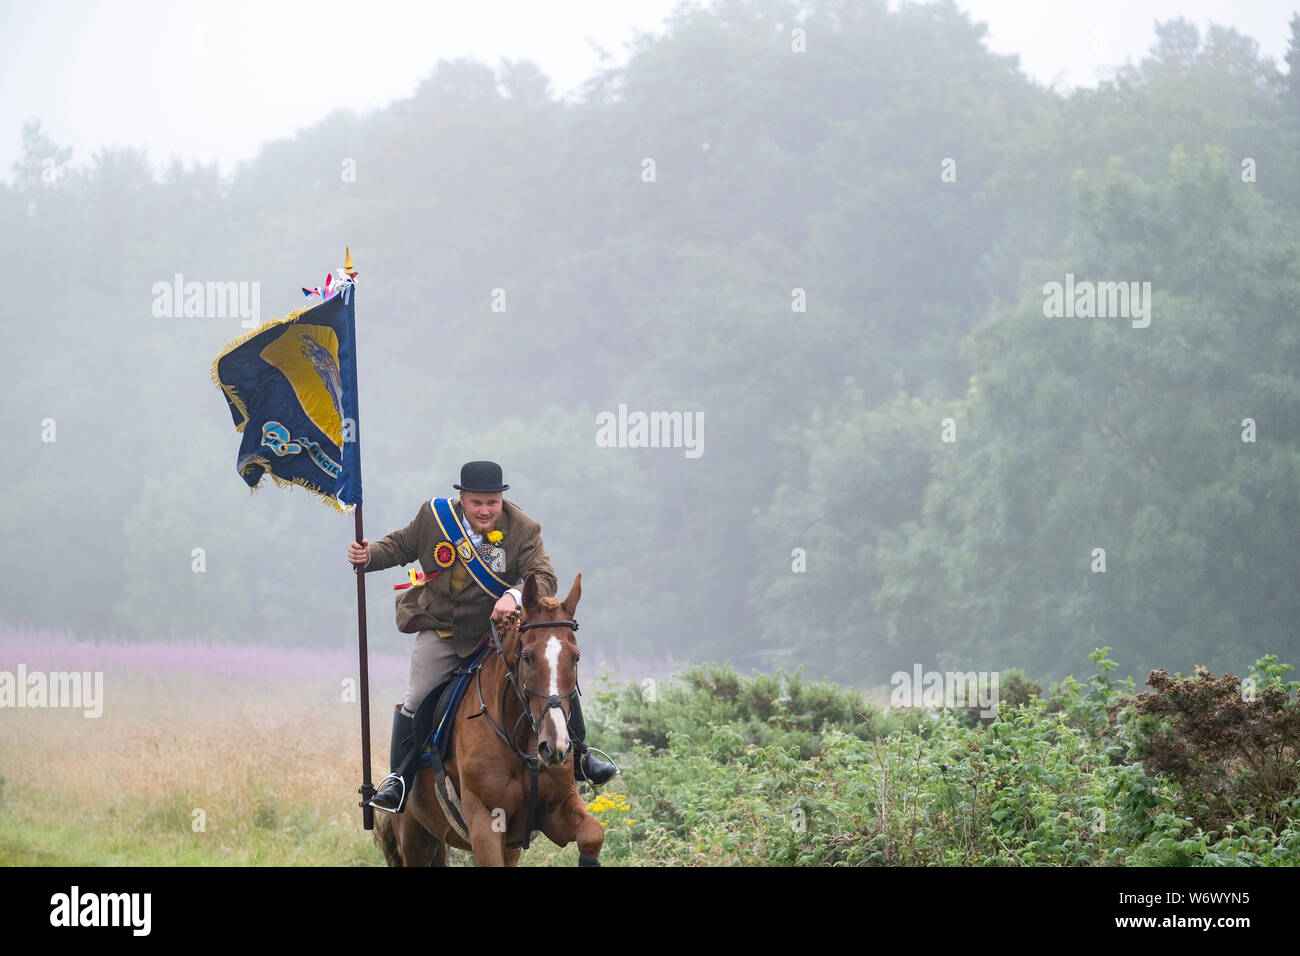 Lauder, SCOTLAND - August 03: Lauder Common Riding 2019. Christopher Purves, Lauder Cornet 2019 with the Burgh Standard galloping up the Golf Course at the start of the ride out. Lauder Common Riding is part of a tradition of Common Ridings and similar festivals in the Borders and south of Scotland. The main event is a Riding of over 300 horses around the Common land of Lauder. The main Rideout is always the first Saturday in August and is the culmination of a whole week of events. Lauder Common Riding is proud to be one of the original and oldest Border Common Ridings. Stock Photo